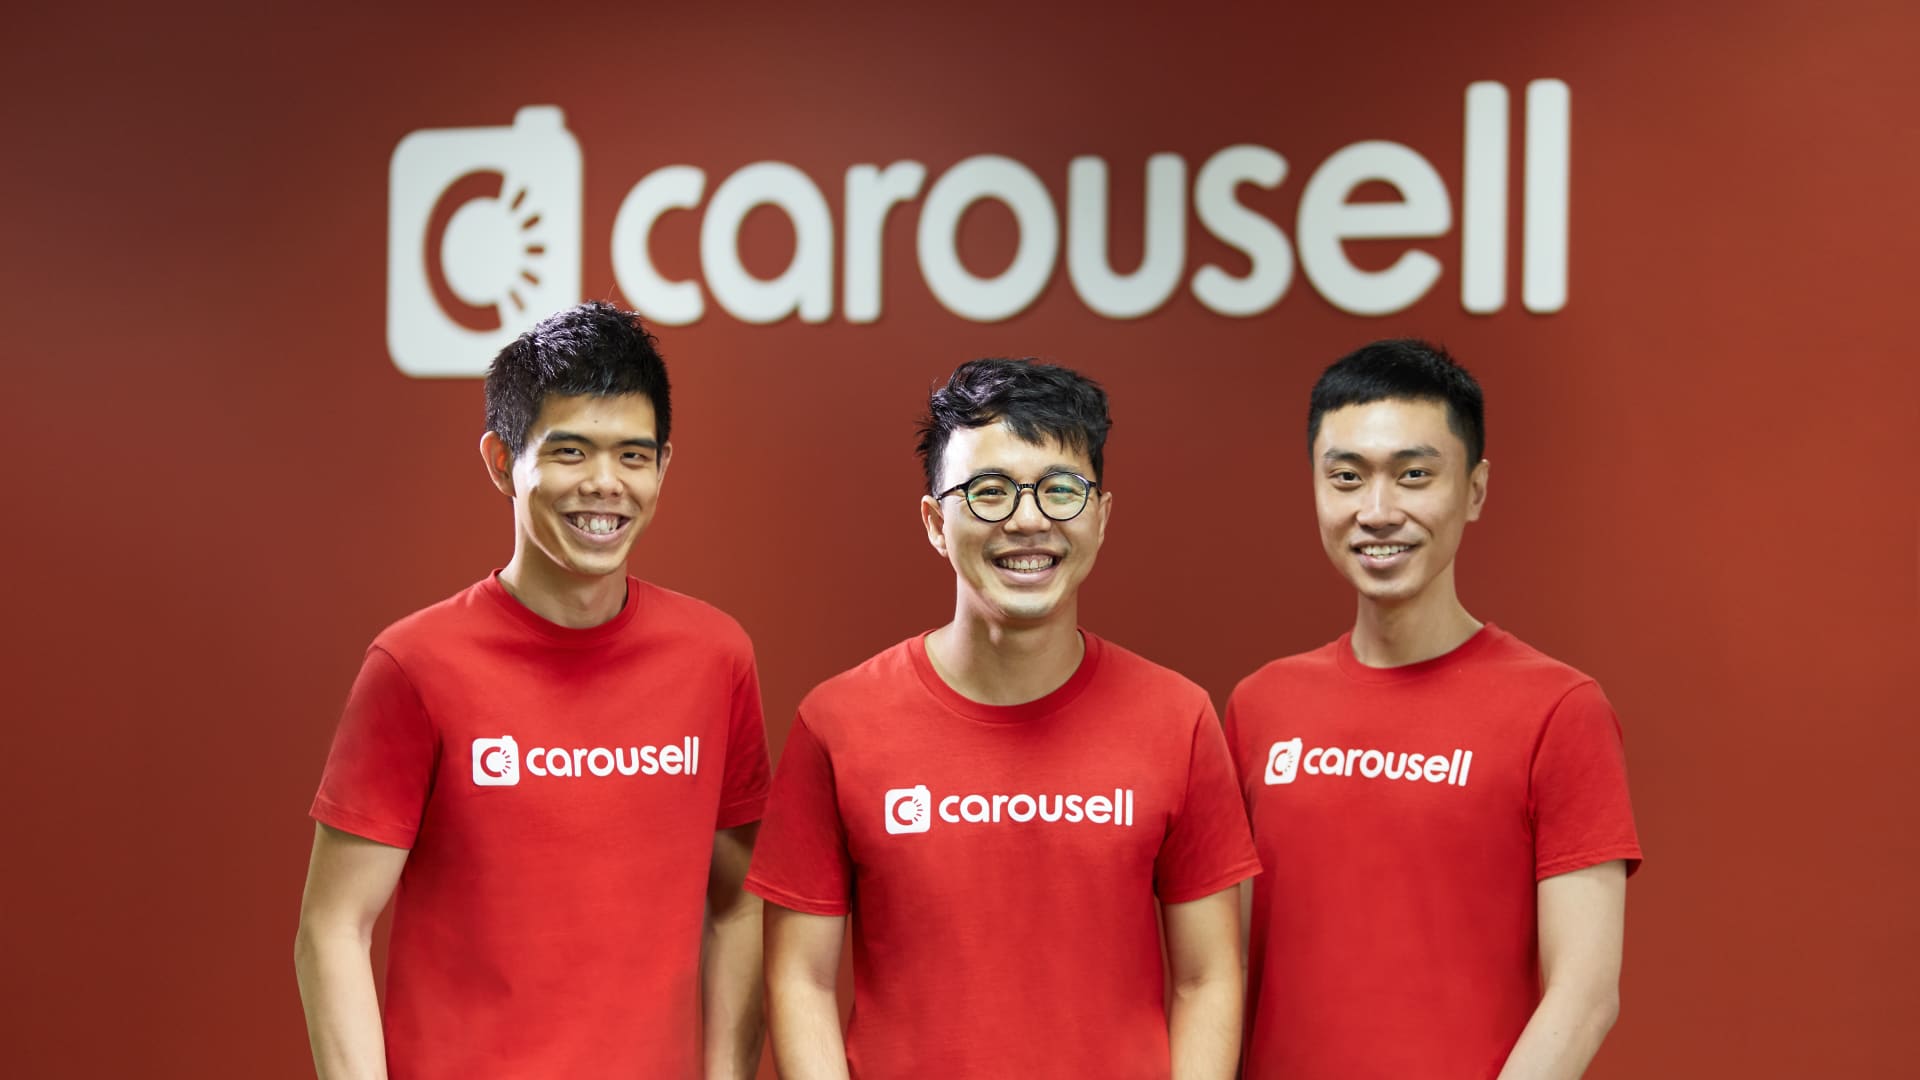 Carousell says it’s ‘on observe’ to profitability, plans to reduce losses this year